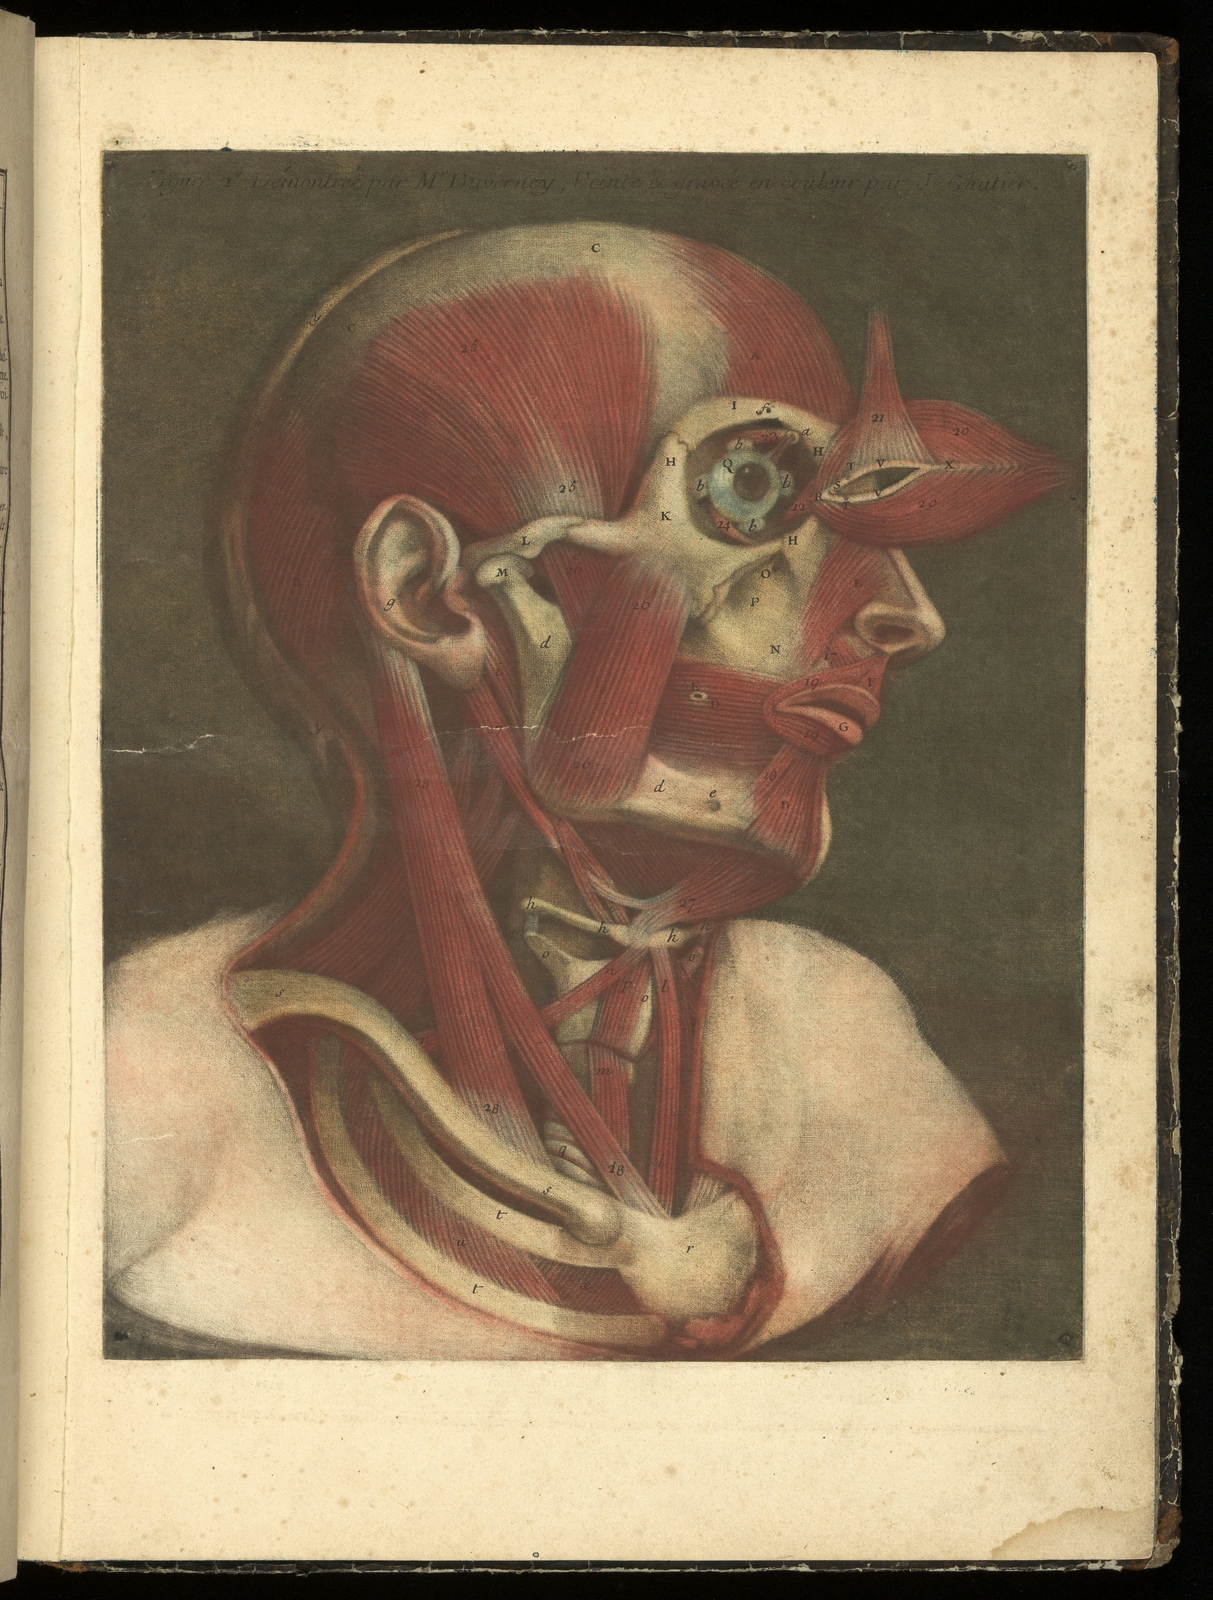 Colour engraving showing the muscles of the face illustrated in colour.